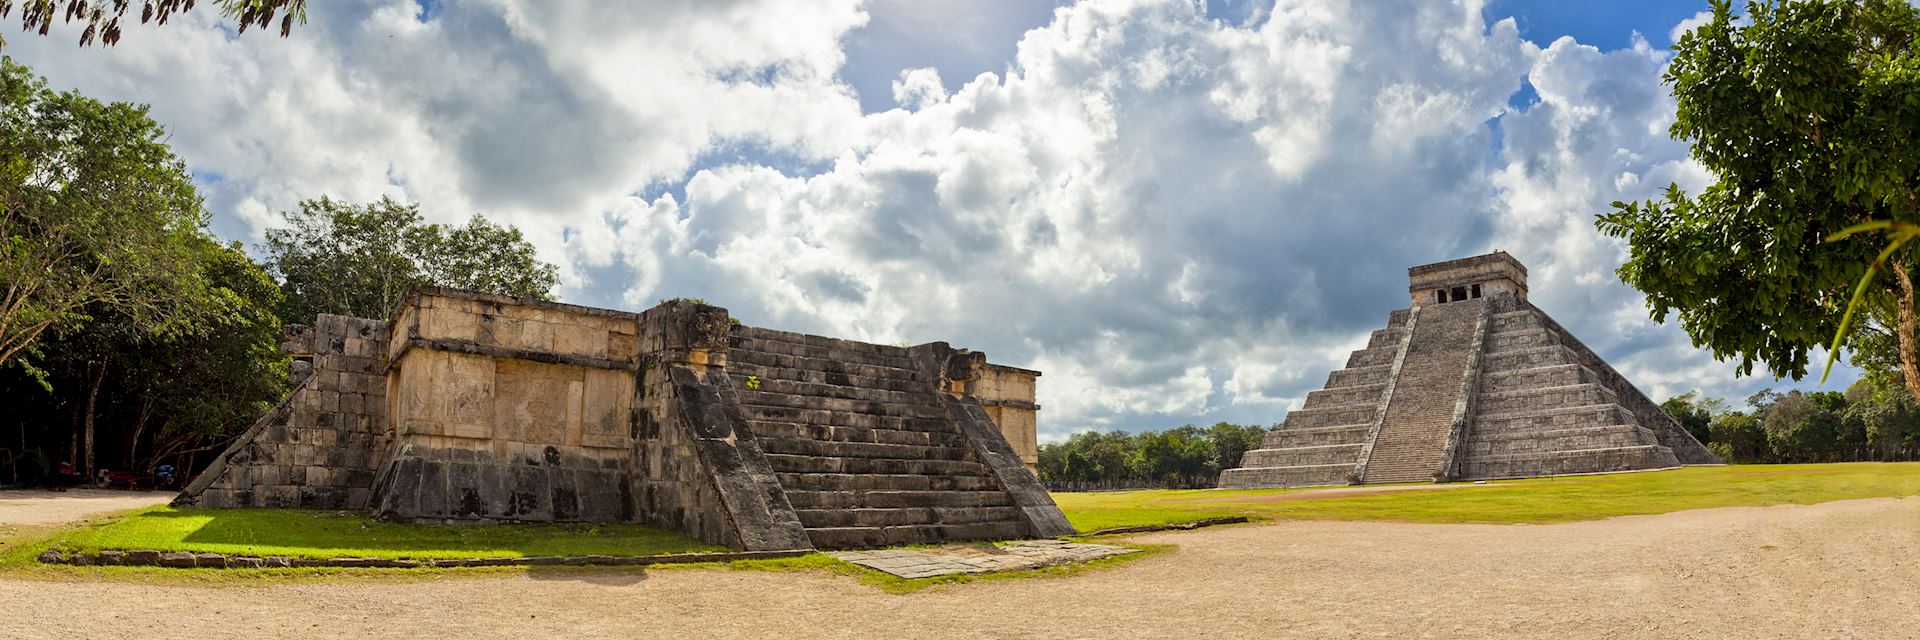 The site of the 12th-century Chichén Itzá